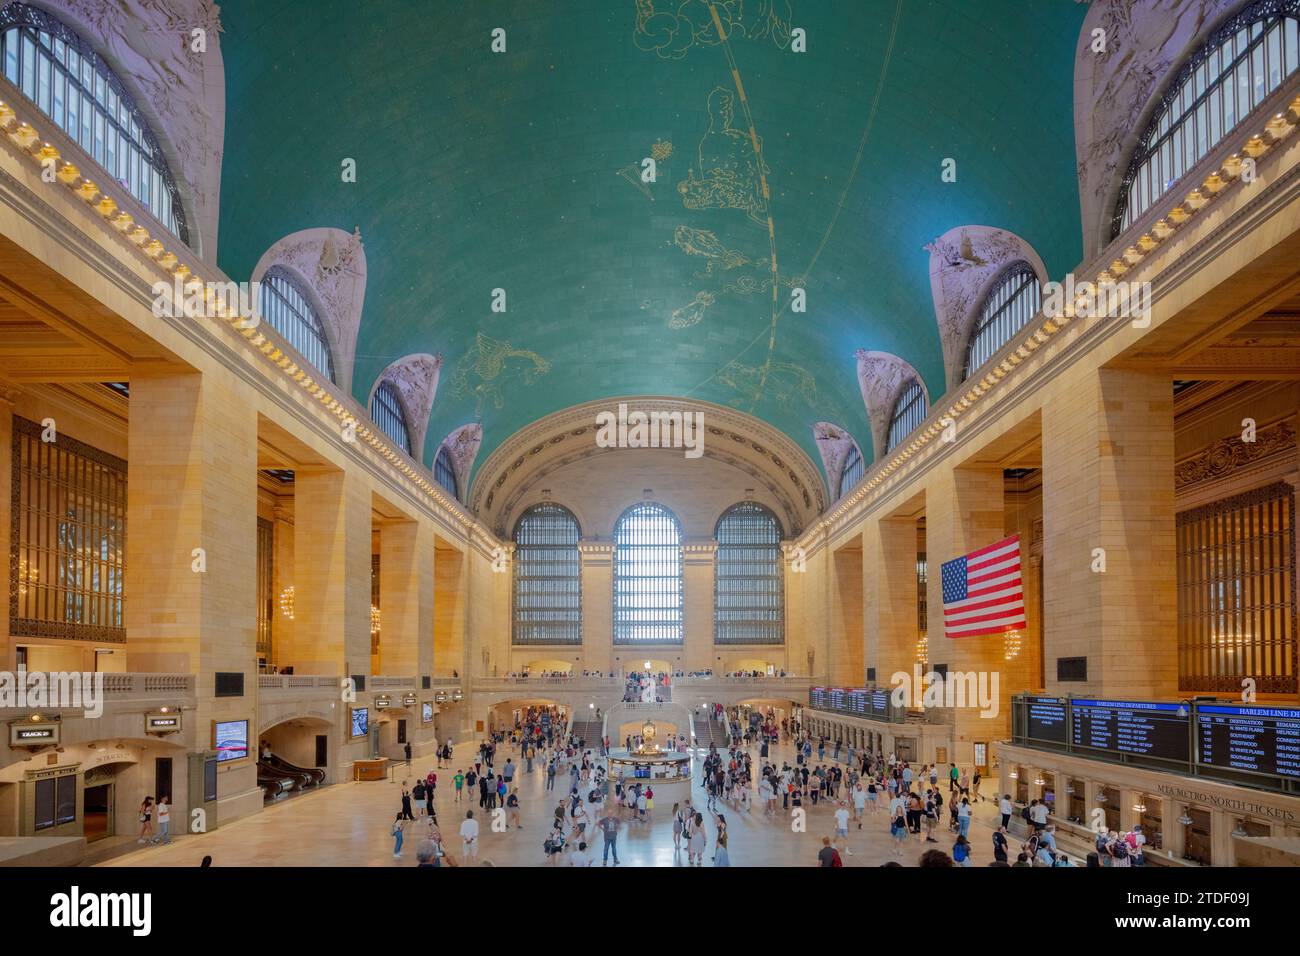 Grand Central Terminal marbled main concourse and vaulted ceiling with painted constellations, New York City, United States of America, North America Stock Photo